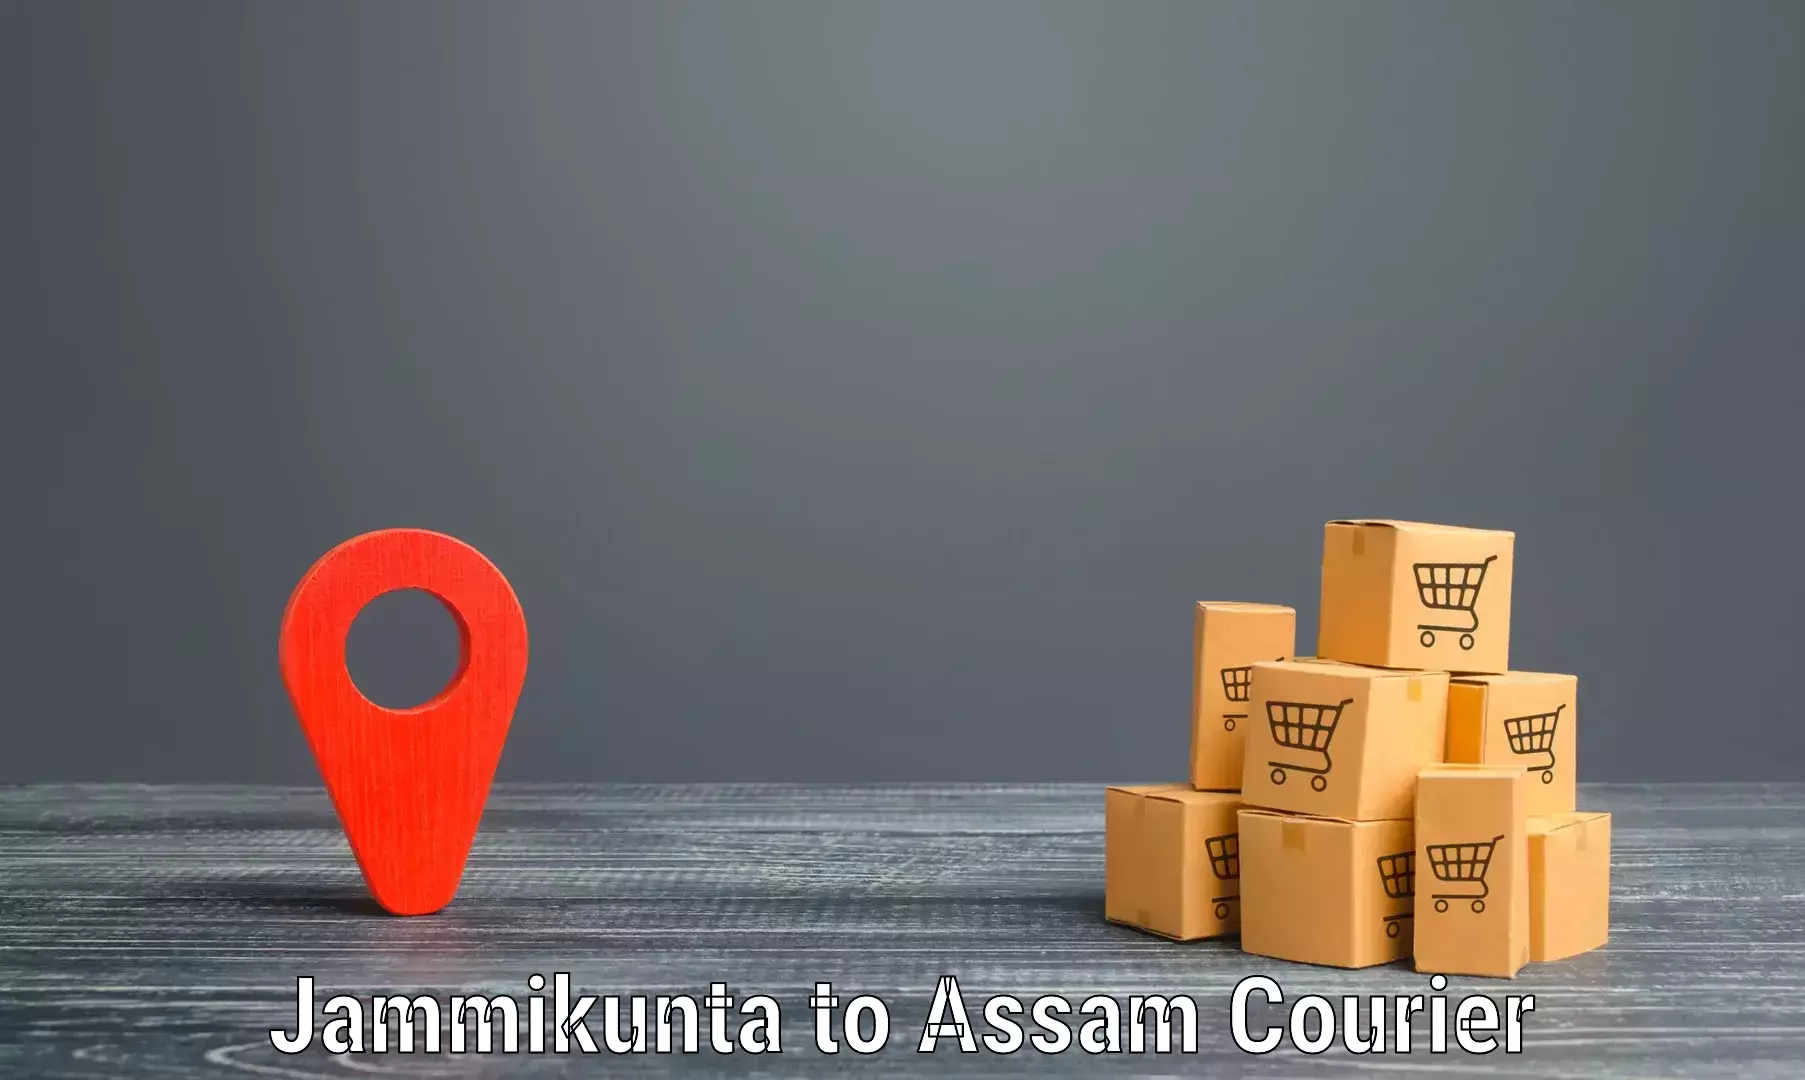 Express delivery network Jammikunta to Kaliabor